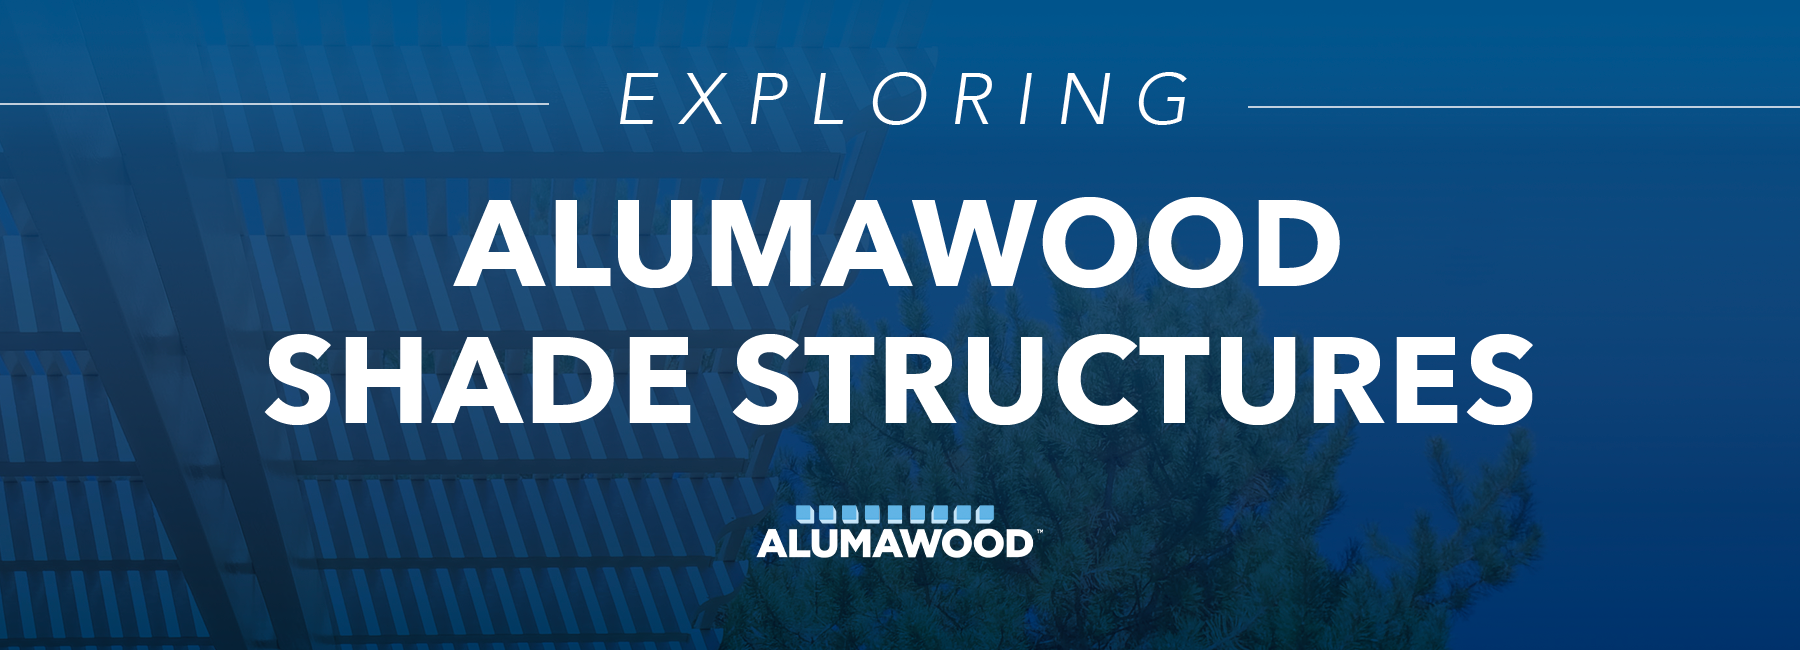 Alumawood shade structures graphic